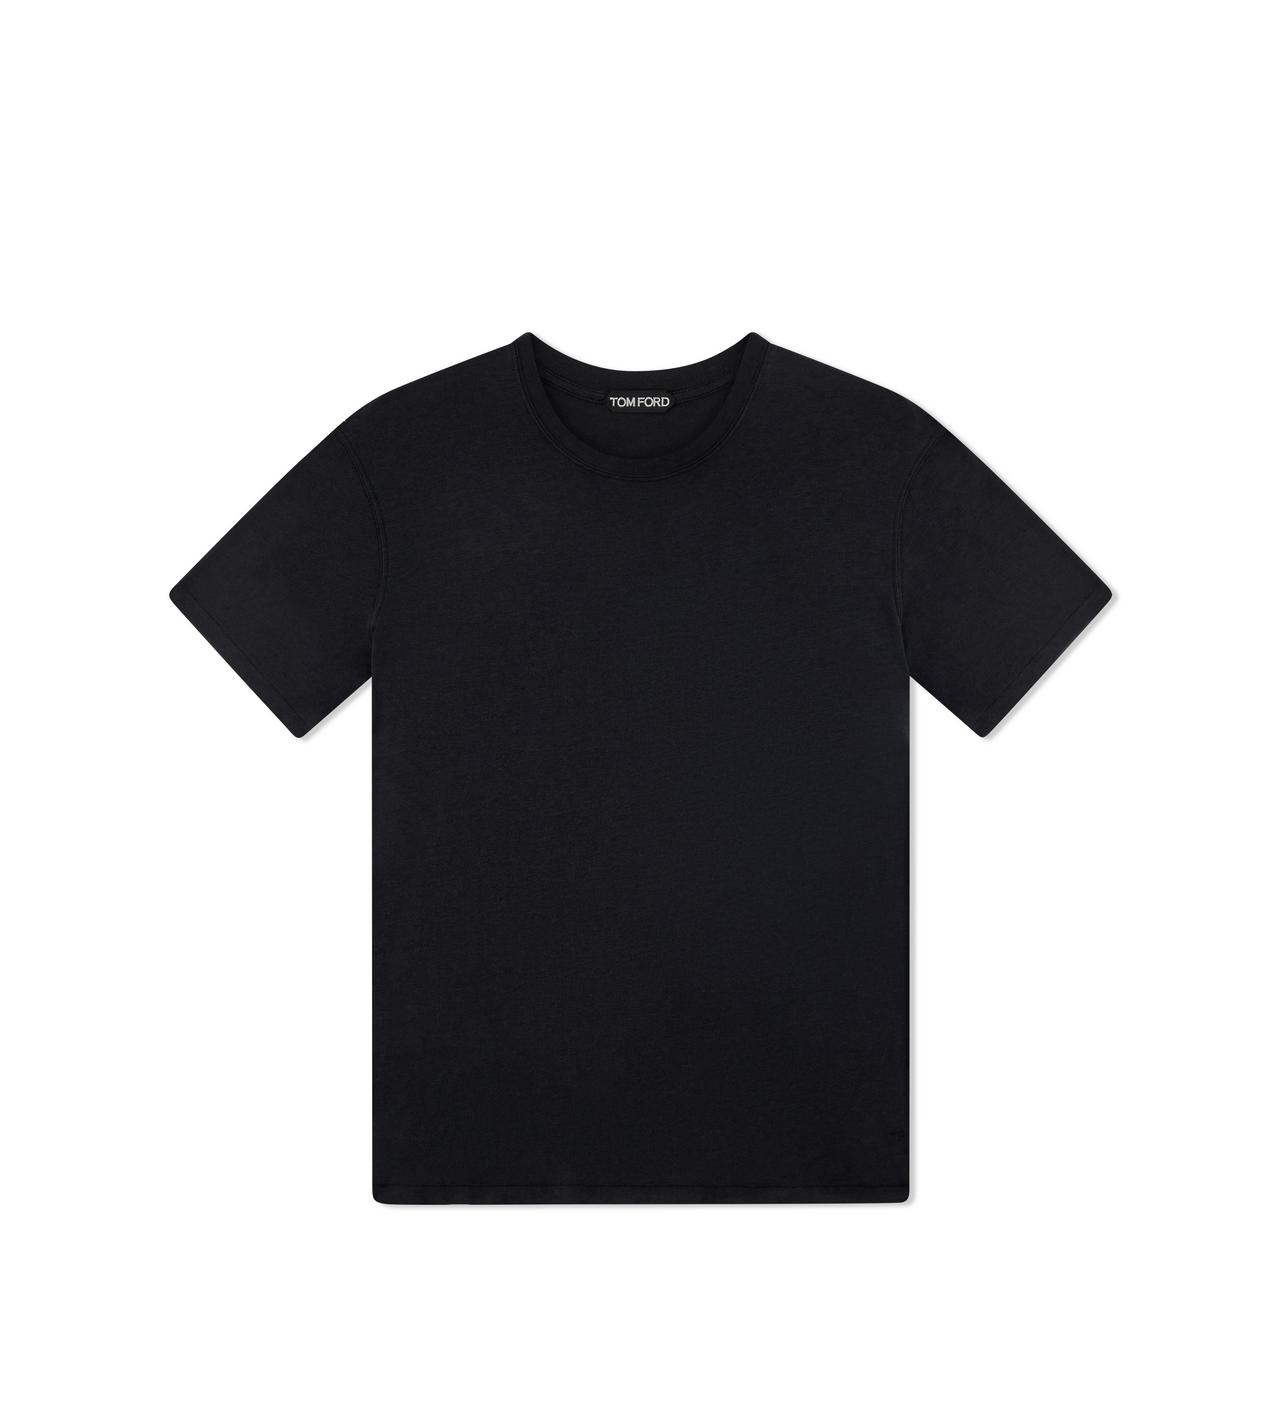 LYOCELL COTTON CREW T-SHIRT image number 0